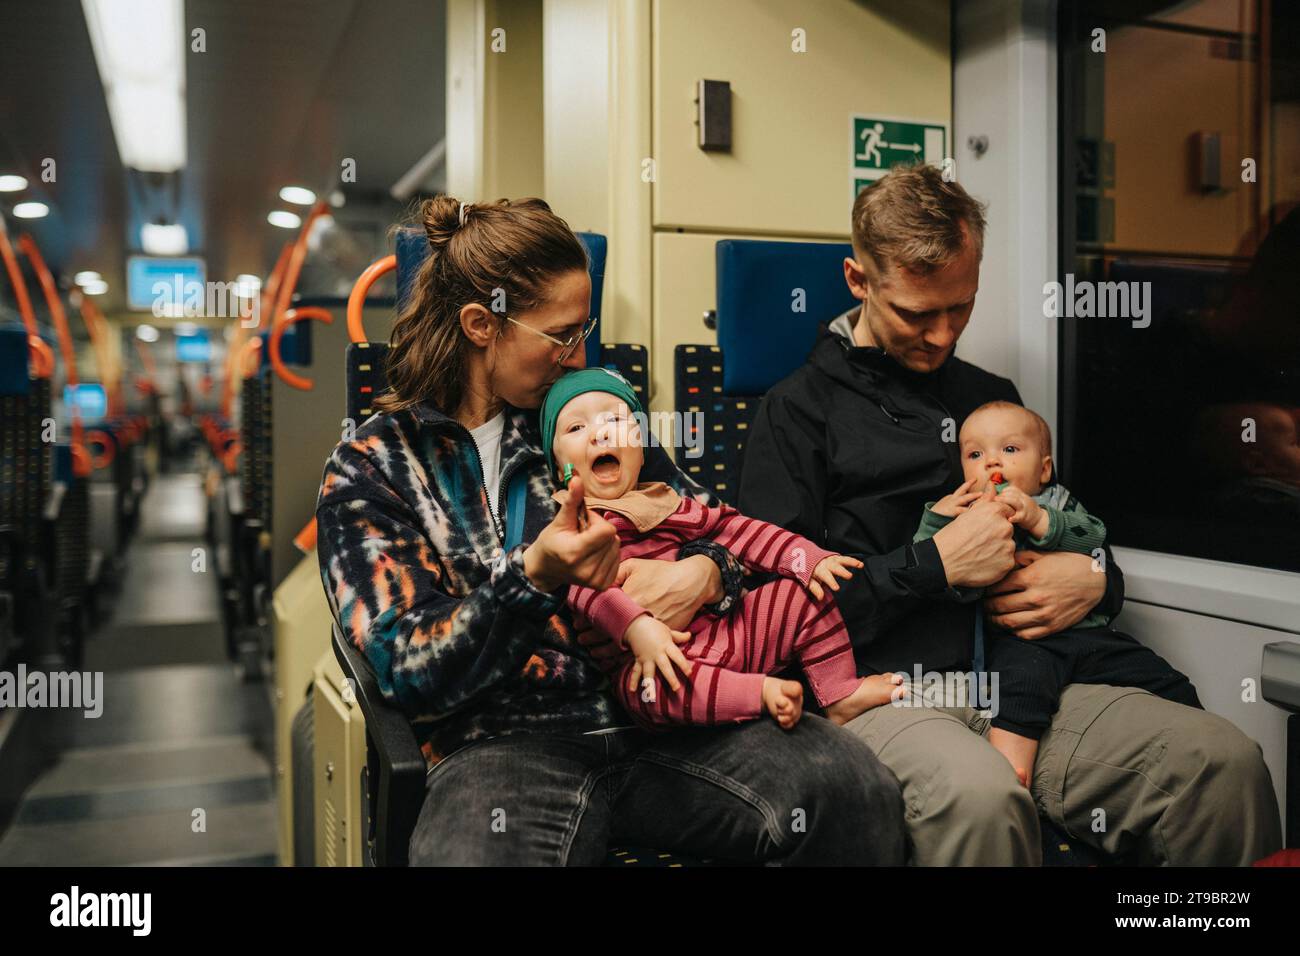 Parents traveling with babies by train Stock Photo